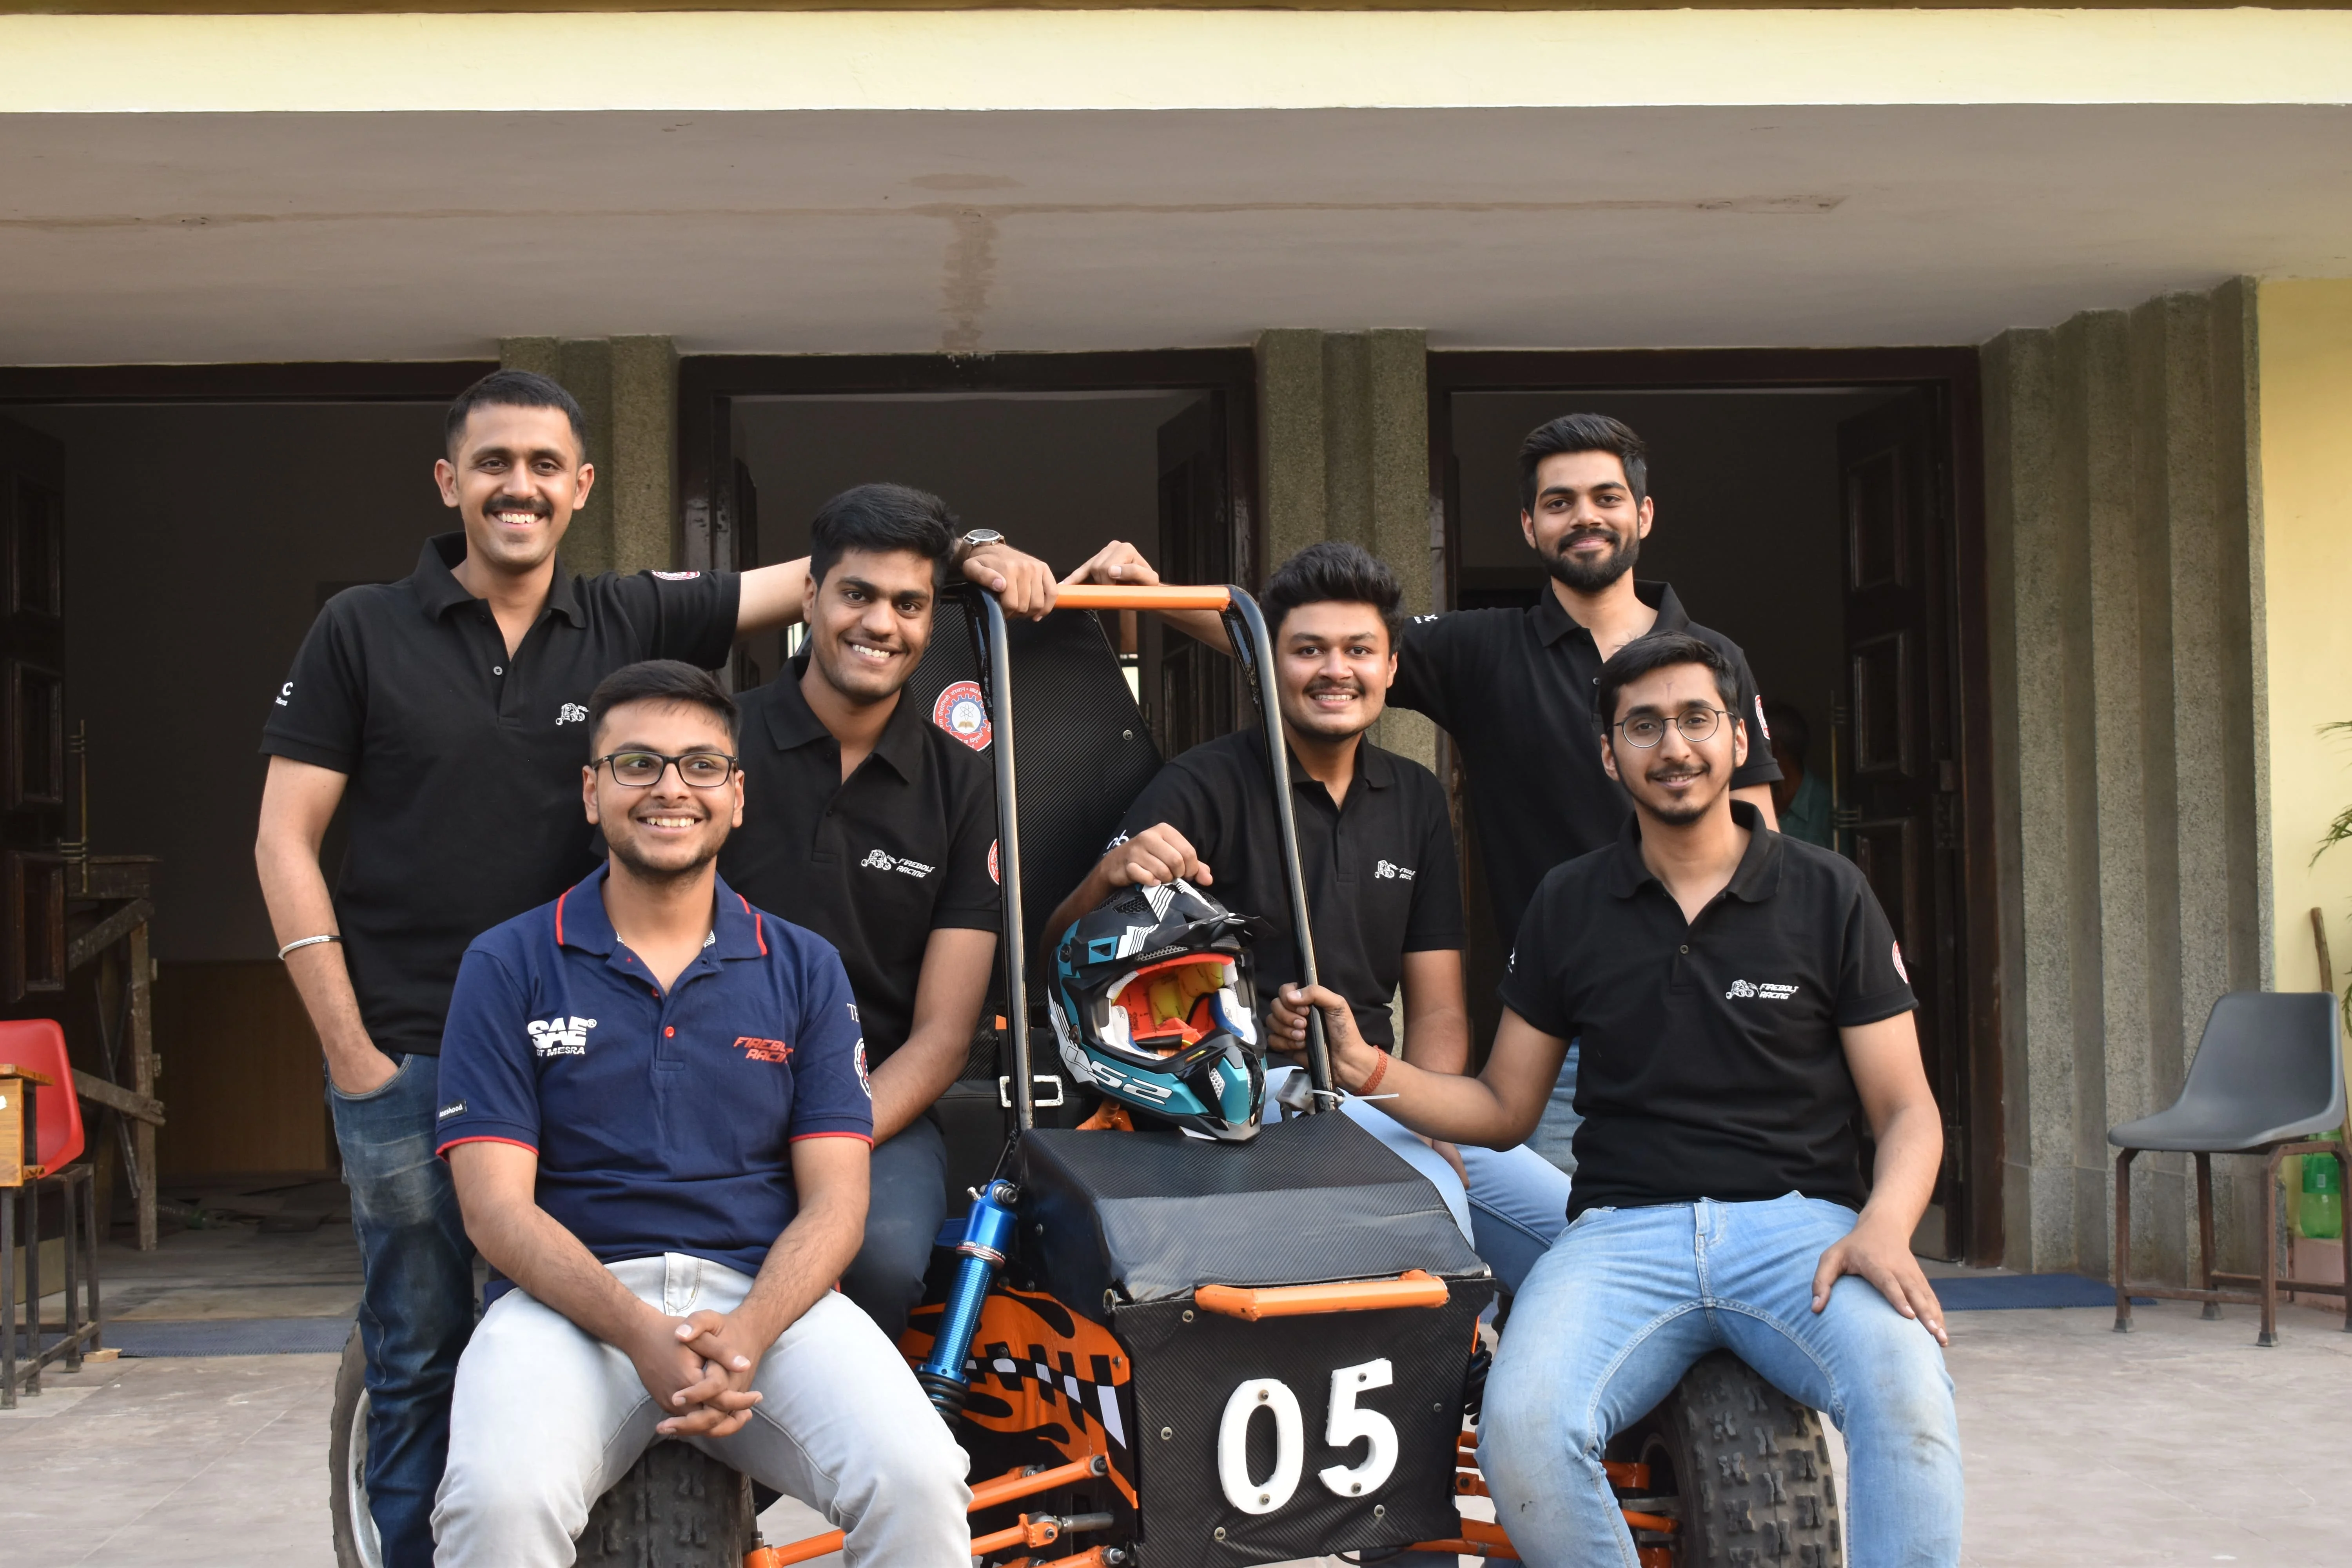 Team Firebolt Racing with its ATV of 2022